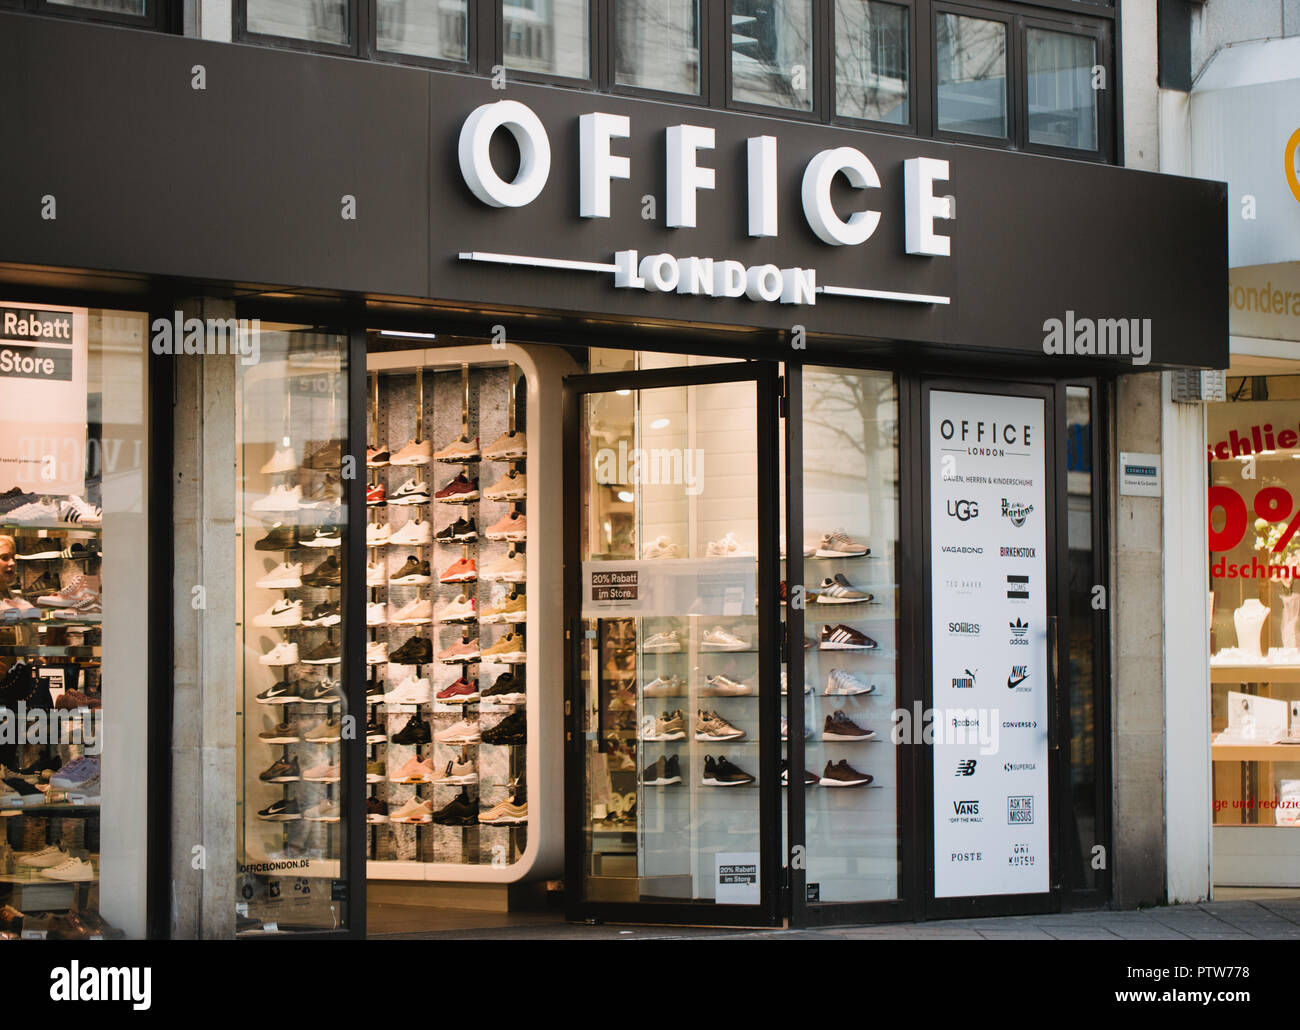 Nurnberg, Germany - April 5, 2018: Office London shop on the street in Old  Town Stock Photo - Alamy